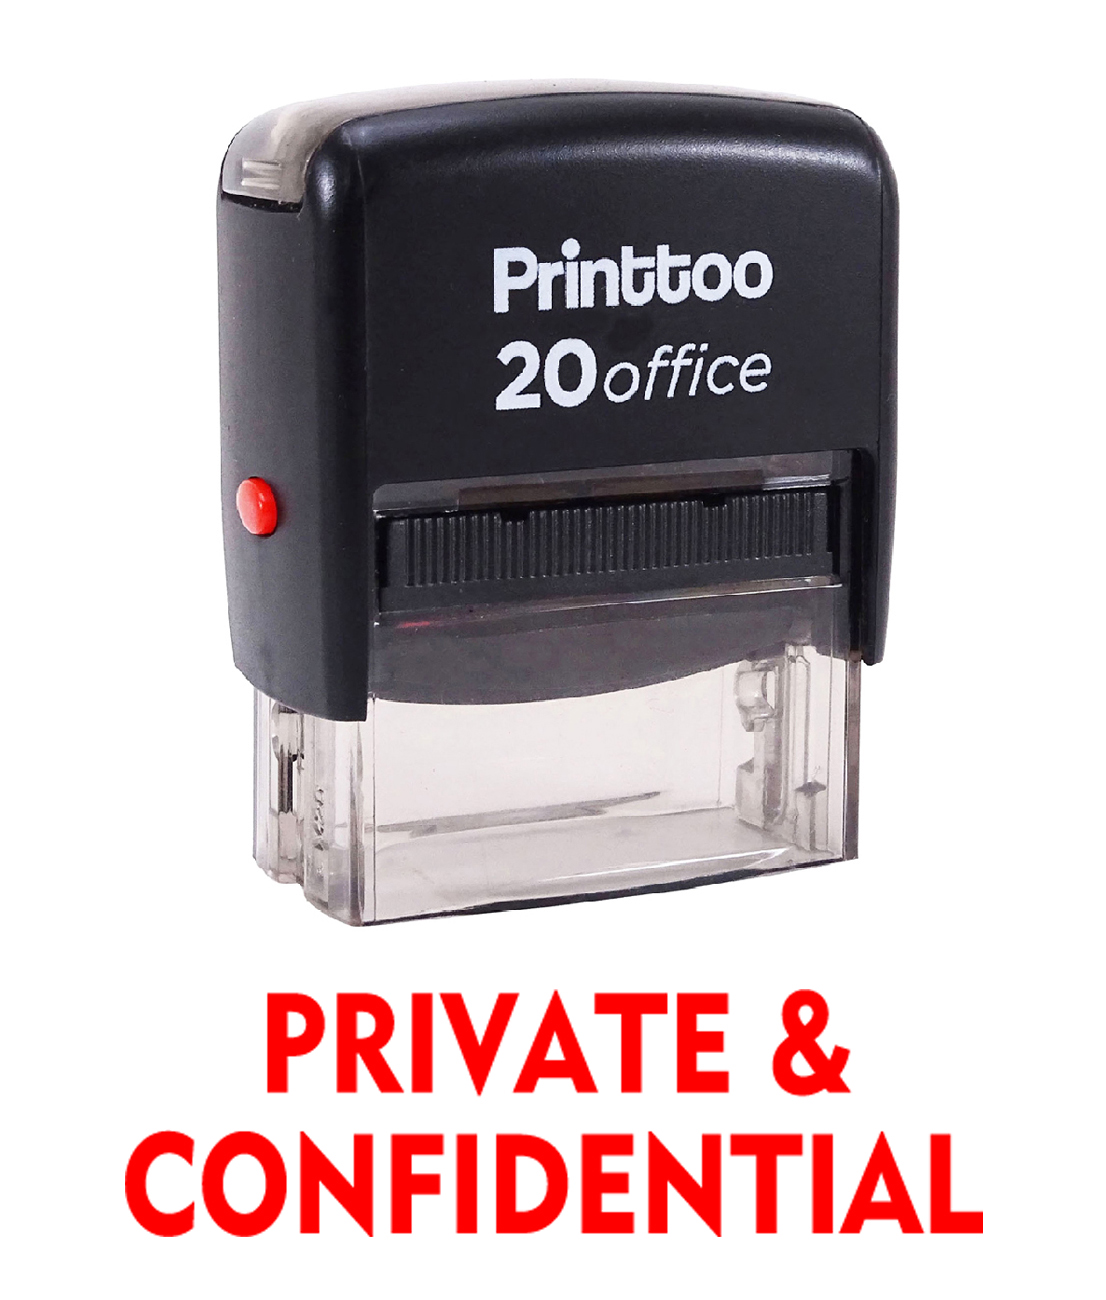 Custom TOP SELLING Business Address 4 LINE Self-Inking Rubber Stamp by 9013 